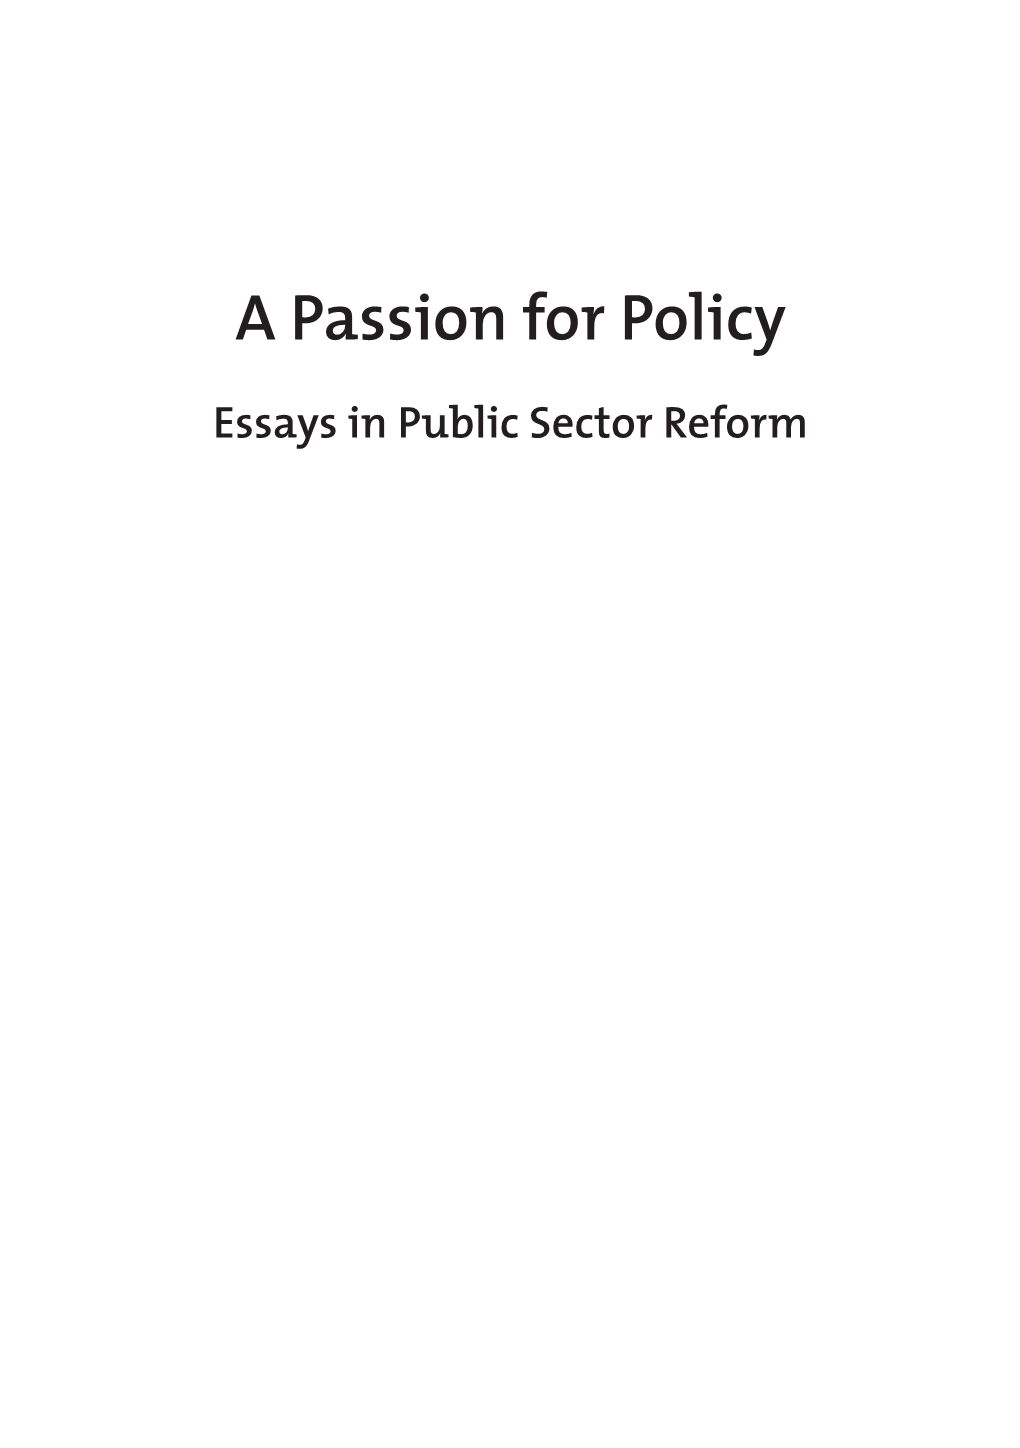 A Passion for Policy: Essays in Public Sector Reform